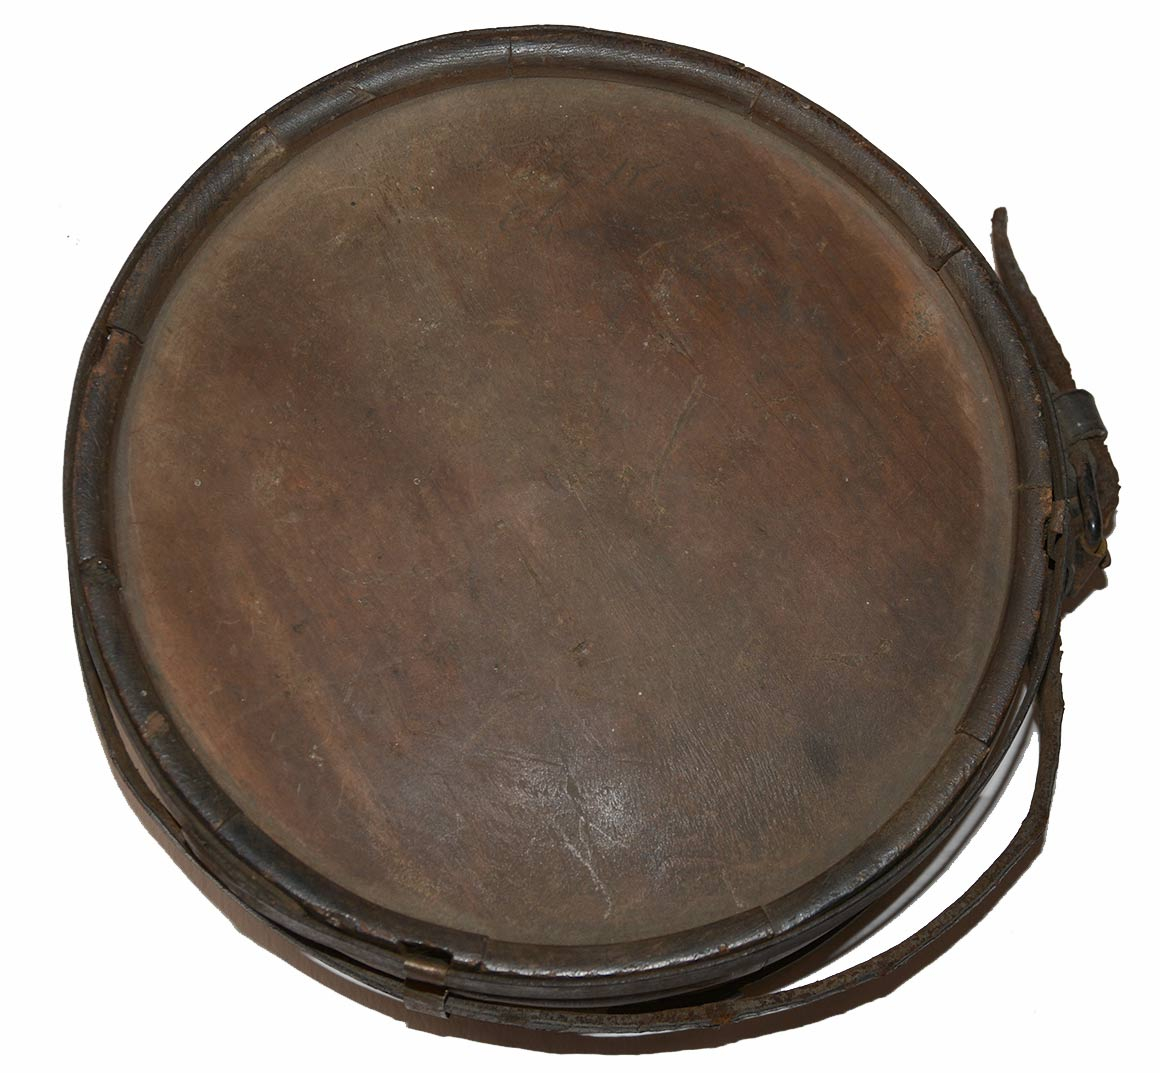 EXCEPTIONAL LATE-WAR CONFEDERATE WOOD CANTEEN, BROUGHT HOME BY A. H. KERR, CHAPLAIN OF THE 9TH MINNESOTA INFANTRY